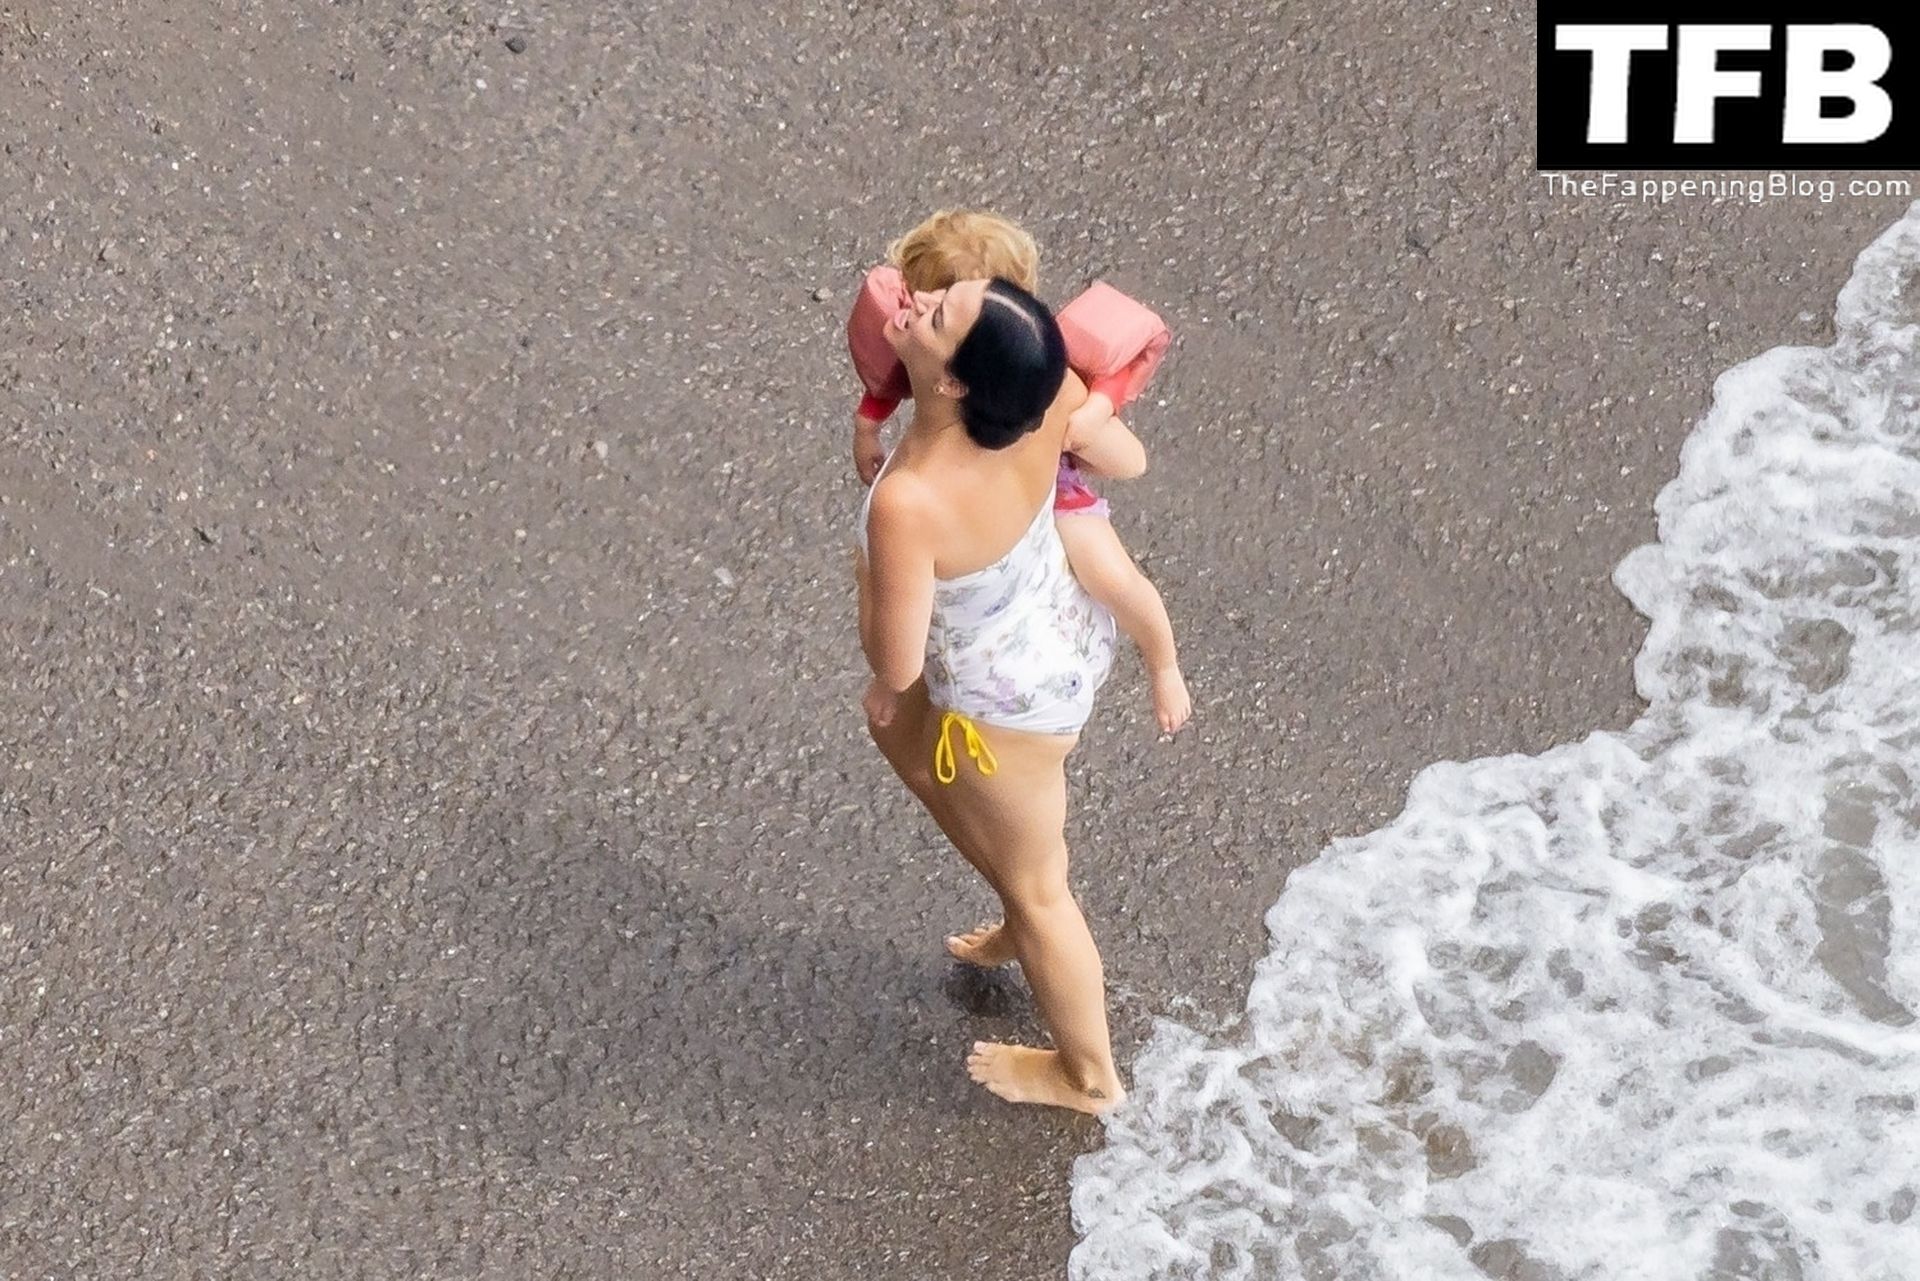 Katy Perry Sexy The Fappening Blog 32 - Katy Perry Rocks a Strapless Swimsuit While Enjoying a Beach Day with Orlando Bloom in Positano (105 Photos)